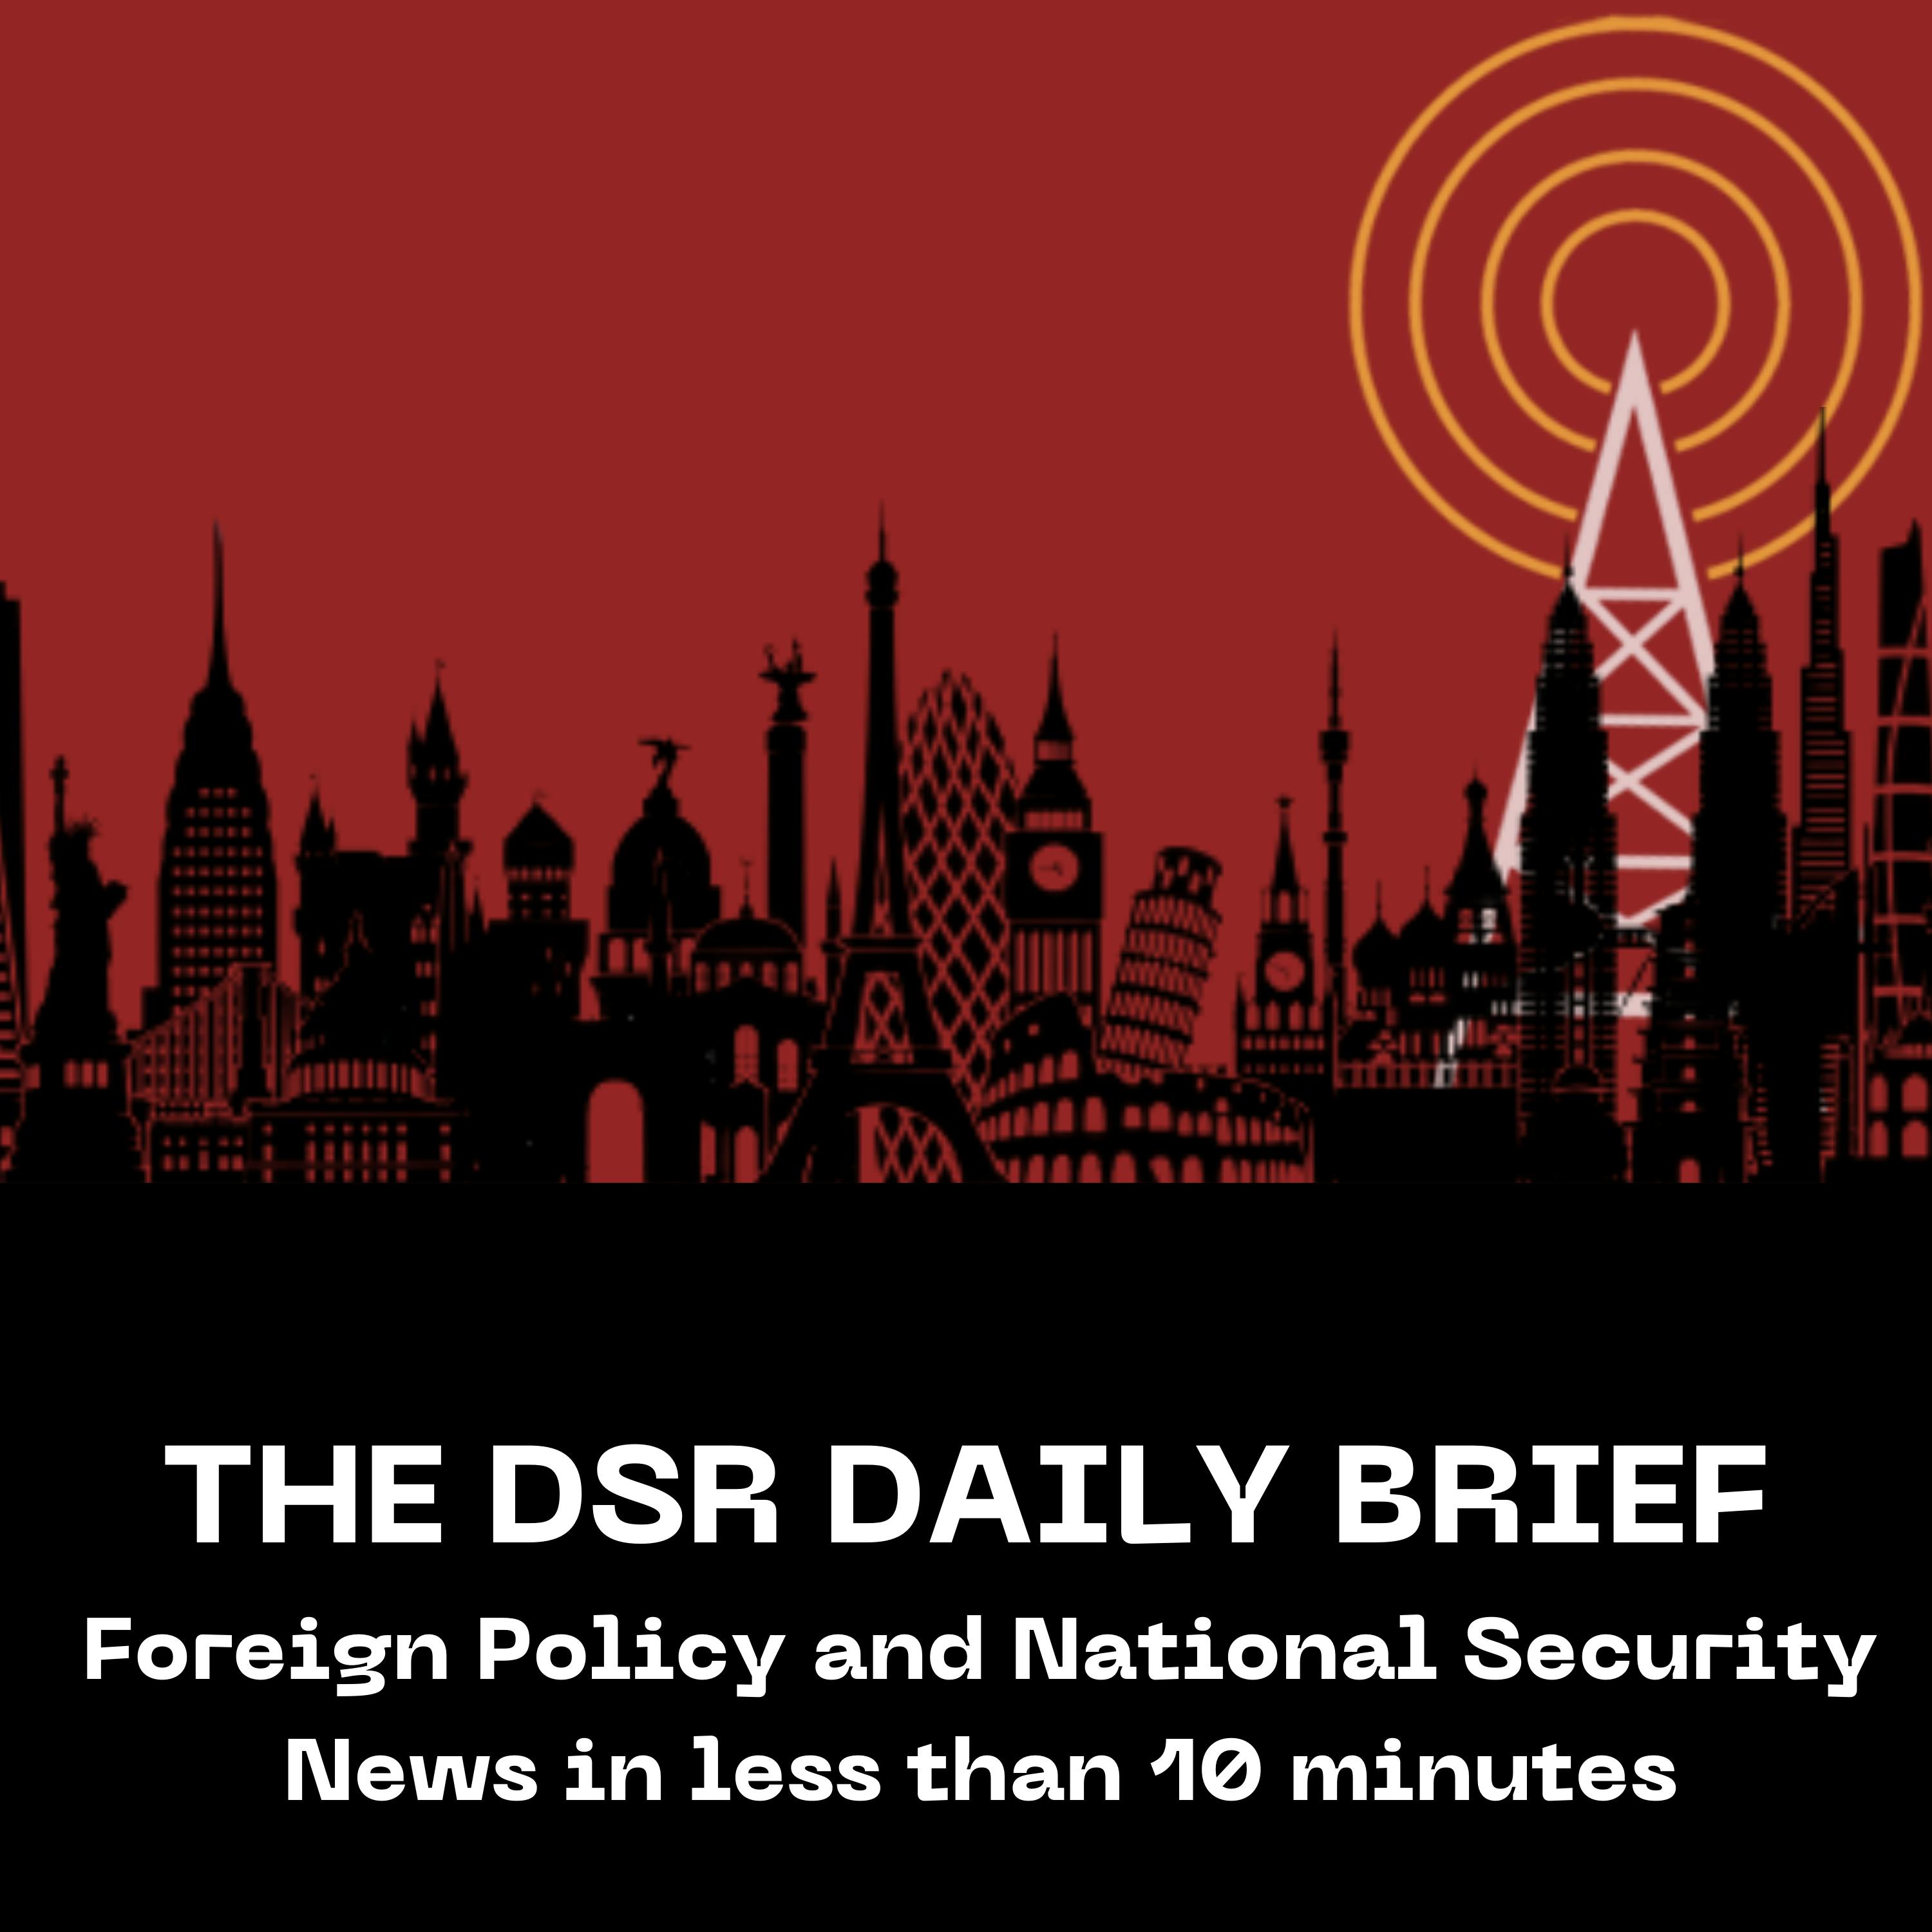 The DSR Daily for May 21: Haiti’s Gang’s Grow Stronger, Prosecutor’s rest in Trump Trial